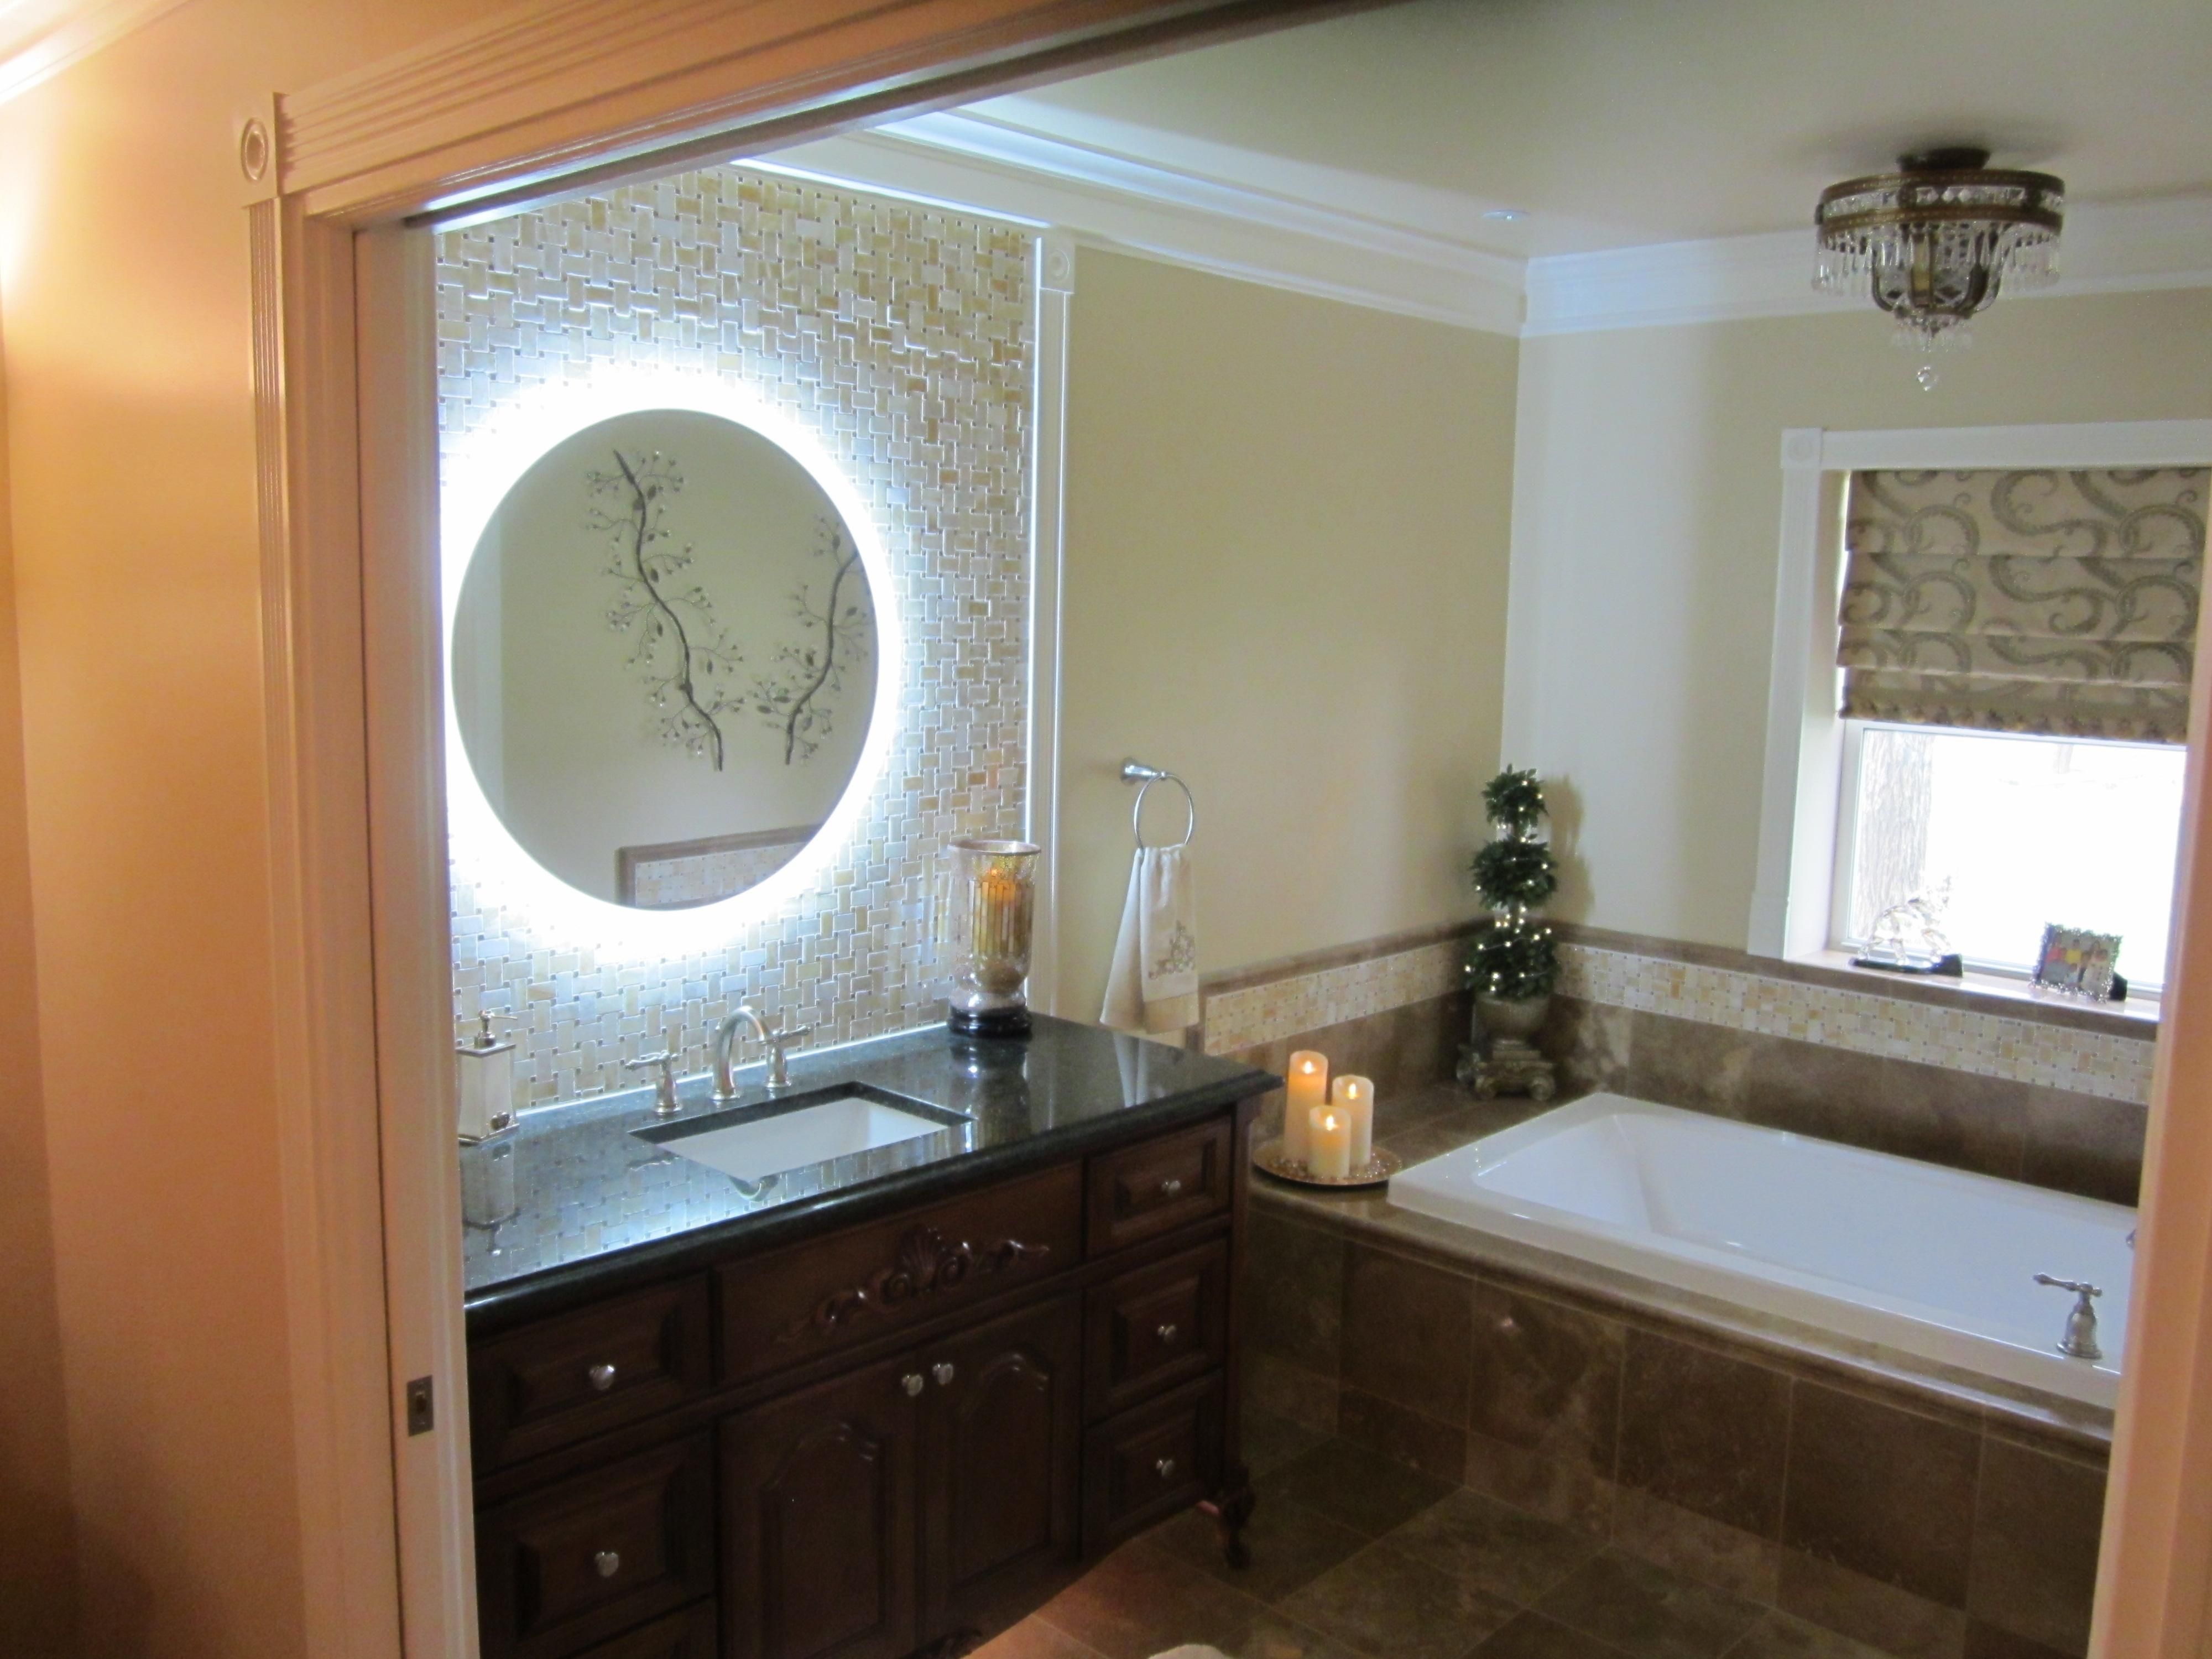 Wall Mounted Lighted Vanity Make Up Mirror Inside Wall Mounted Lighted Makeup Mirrors (View 3 of 20)